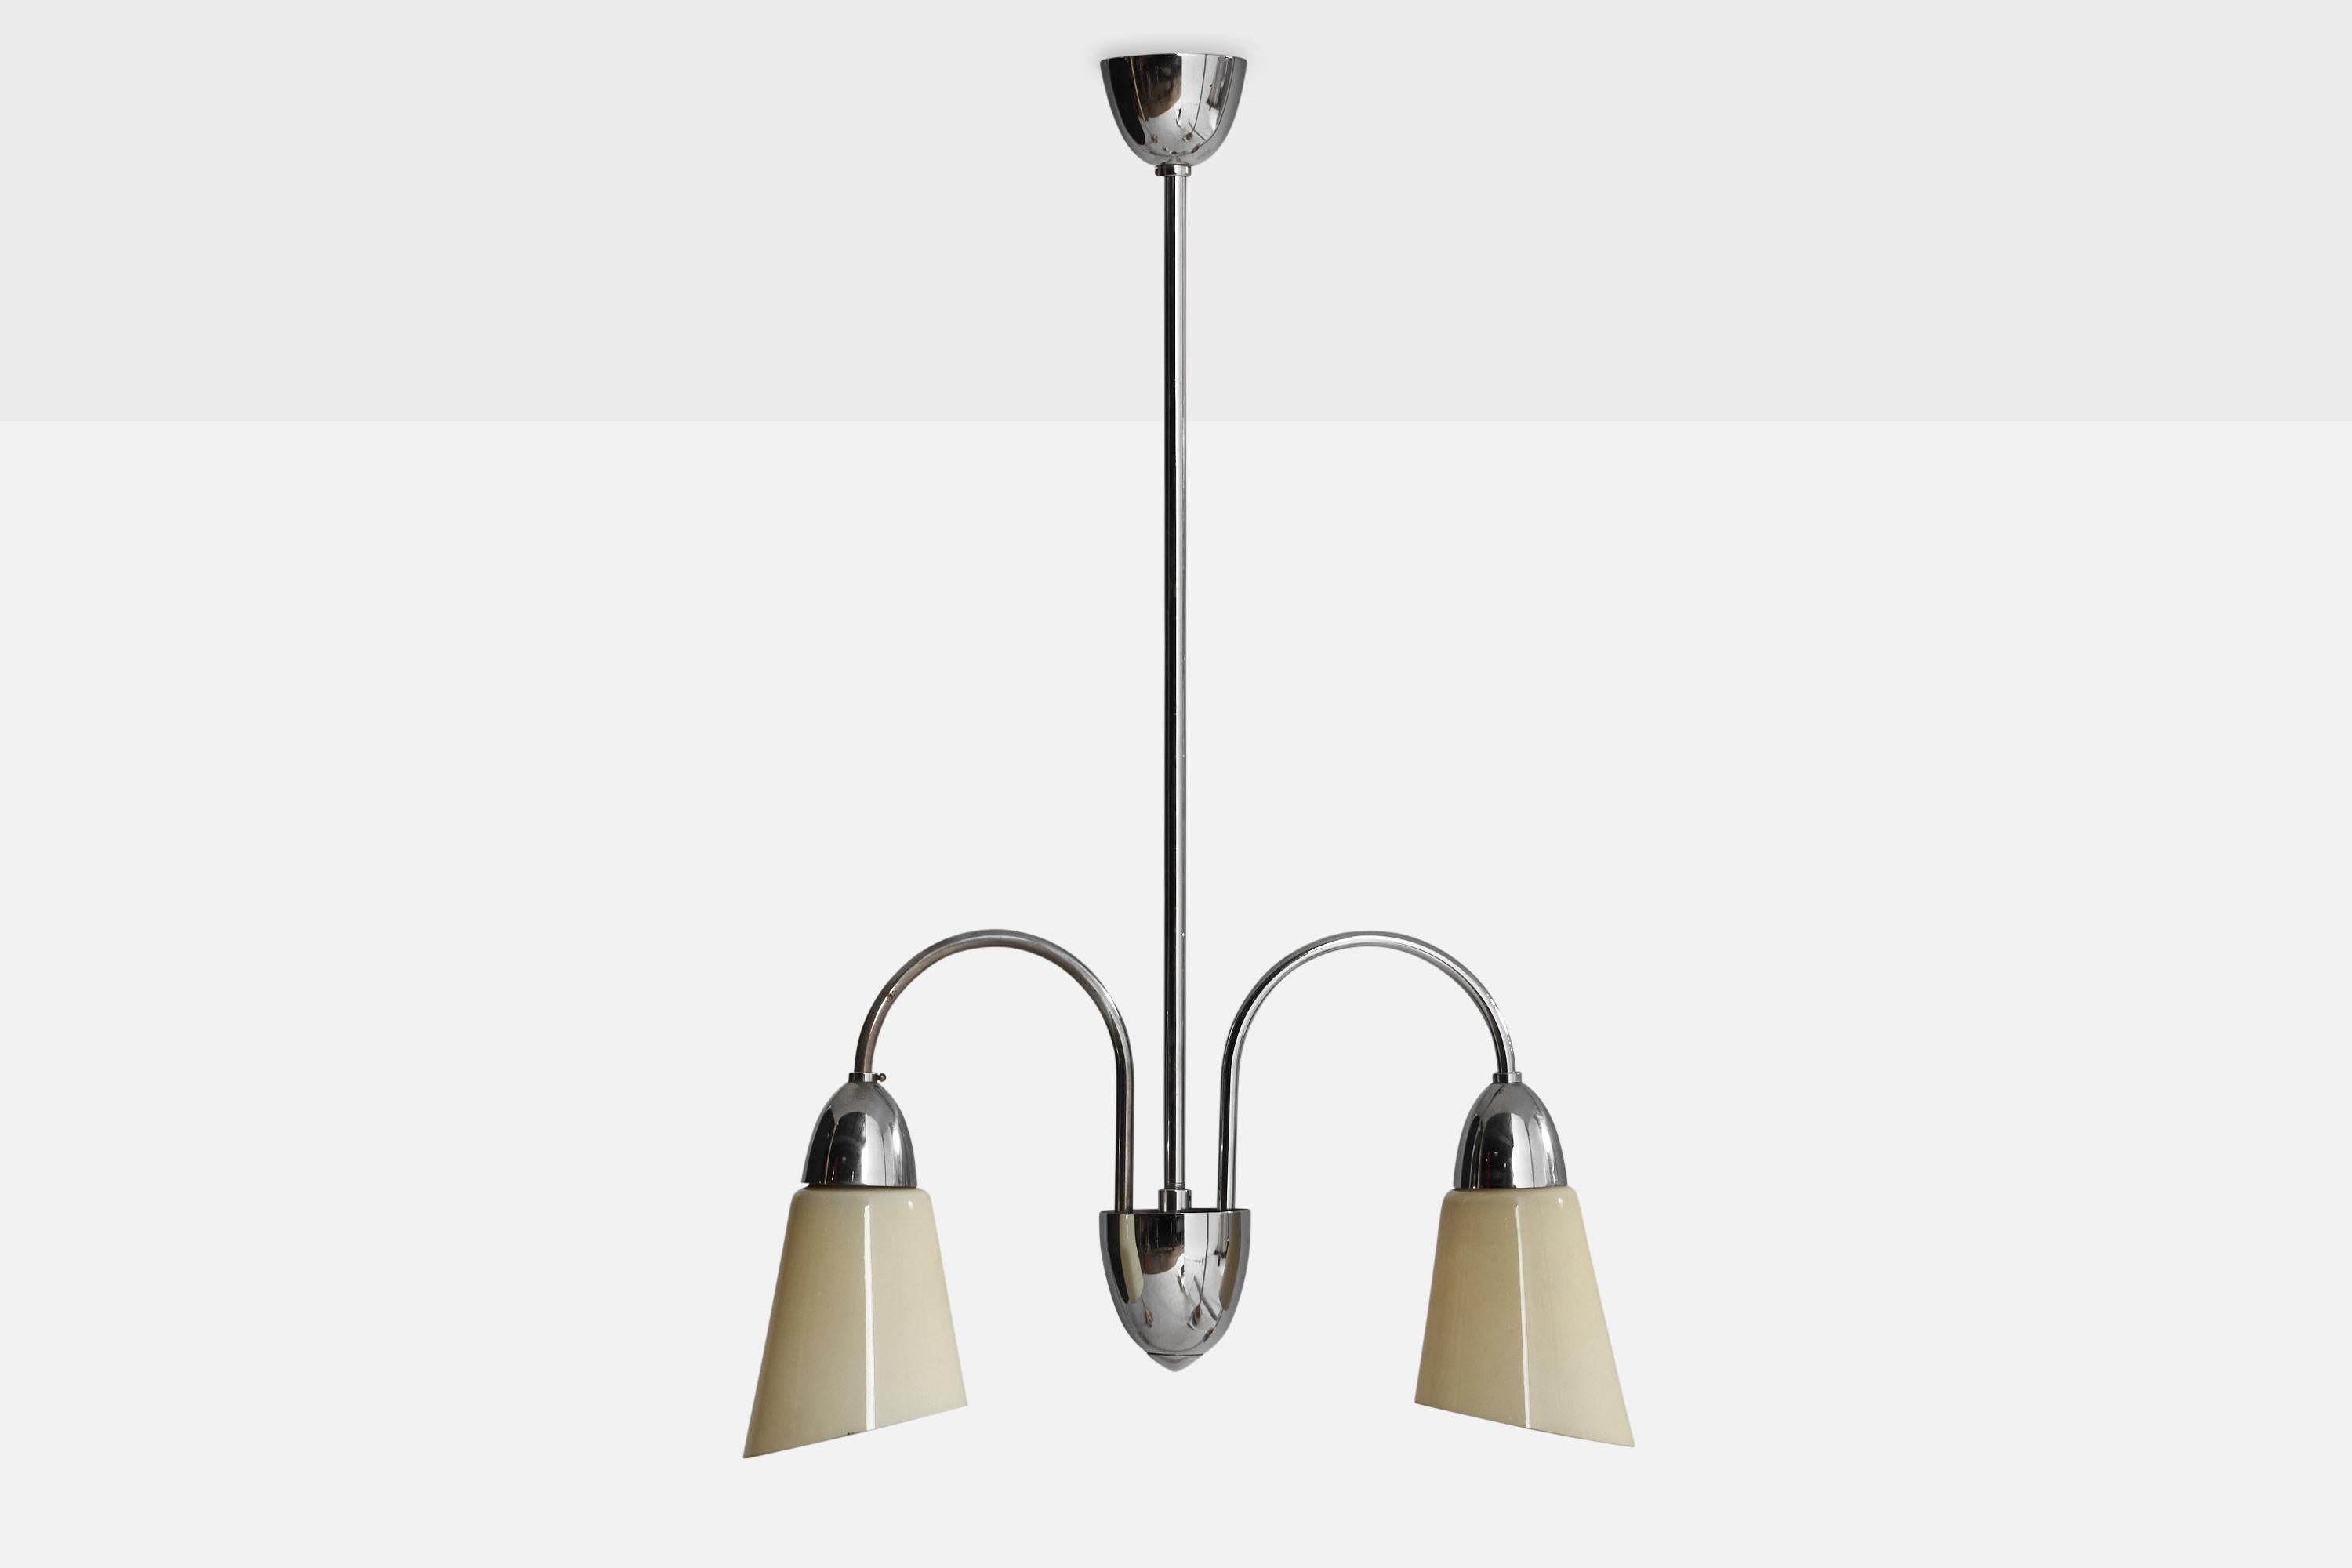 A chrome-metal and off-white opaline glass chandelier designed and produced in Finland, 1940s.

Dimensions of canopy (inches): 2.25” H x 3”  Diameter
Socket takes standard E-26 bulbs. 2 sockets.There is no maximum wattage stated on the fixture. All